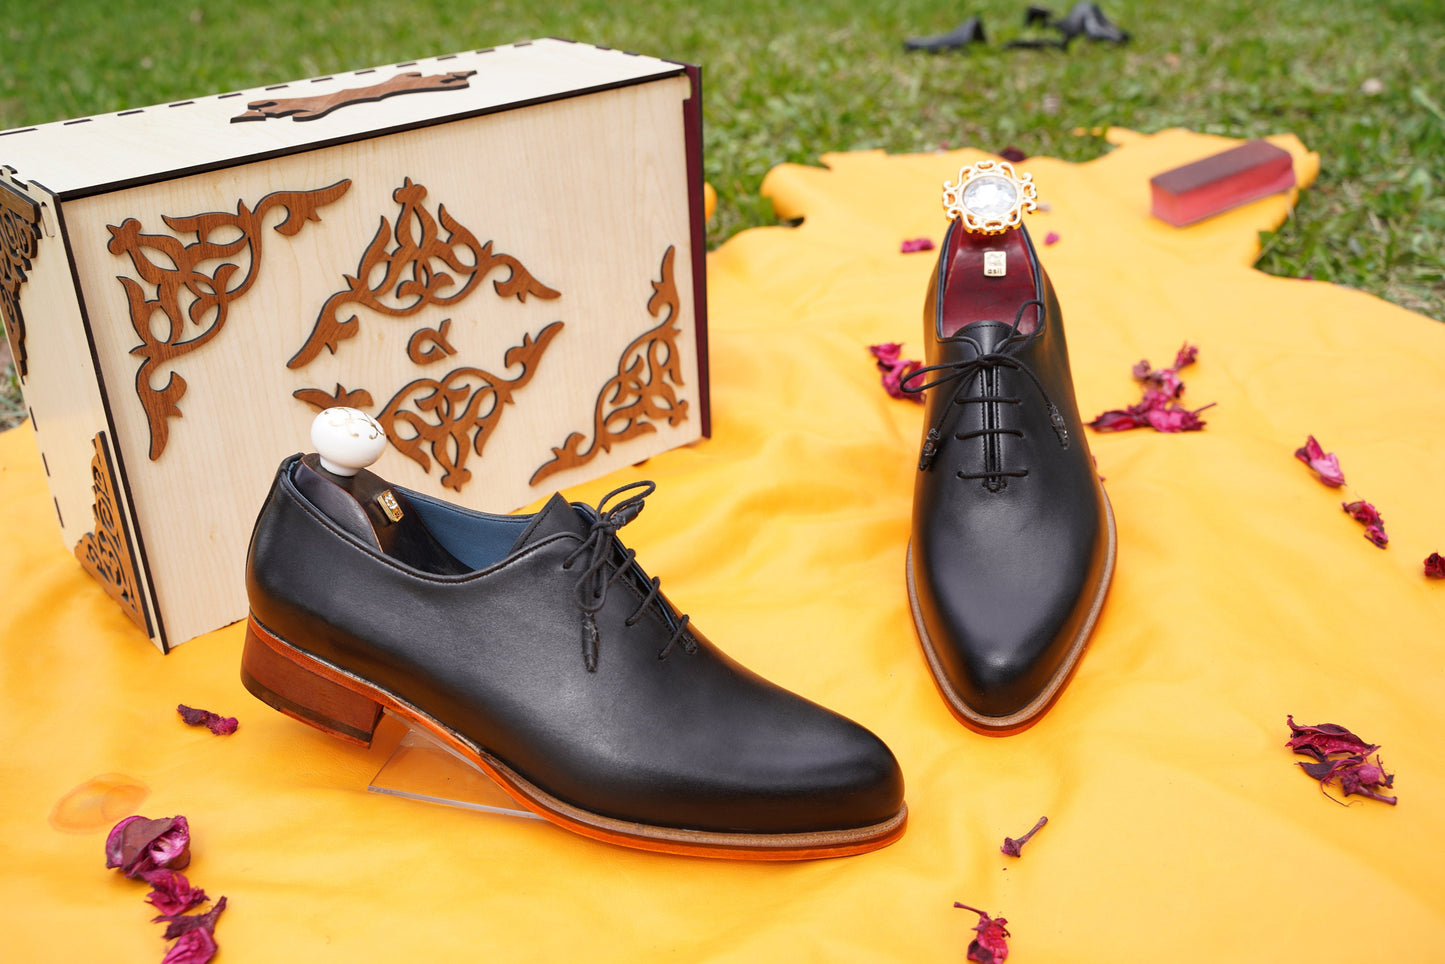 AsilShoestr| Men's Handmade Black Leather Whole Cut Formal Oxford Lace Up Shoes Whole Cut Men Shoes, Bespoke Made-To-Order